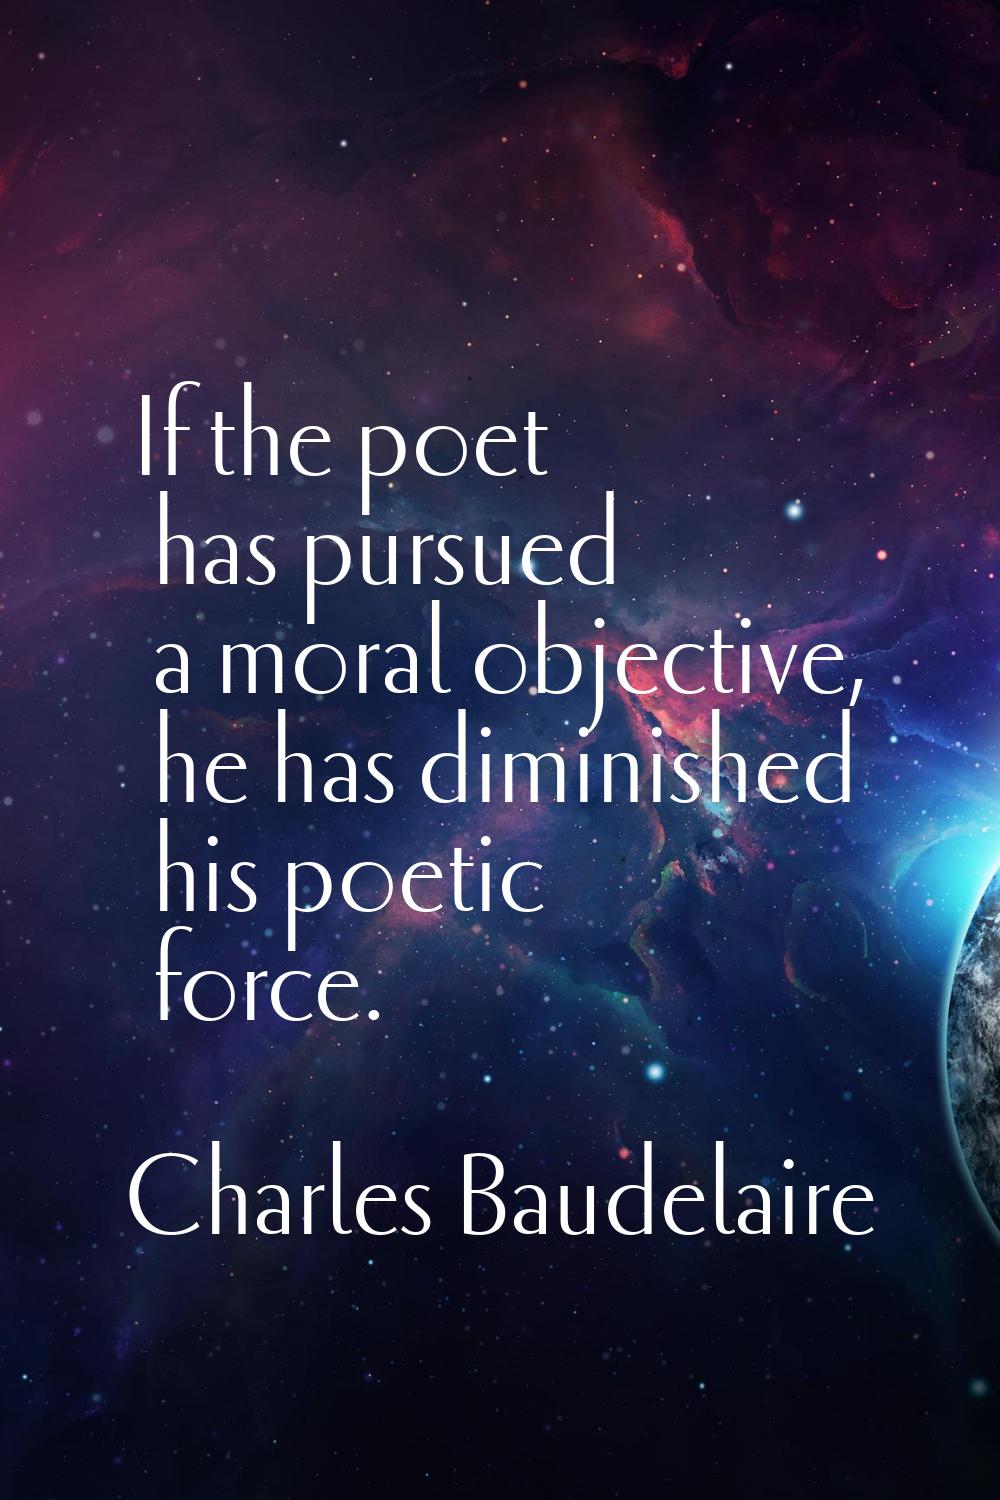 If the poet has pursued a moral objective, he has diminished his poetic force.